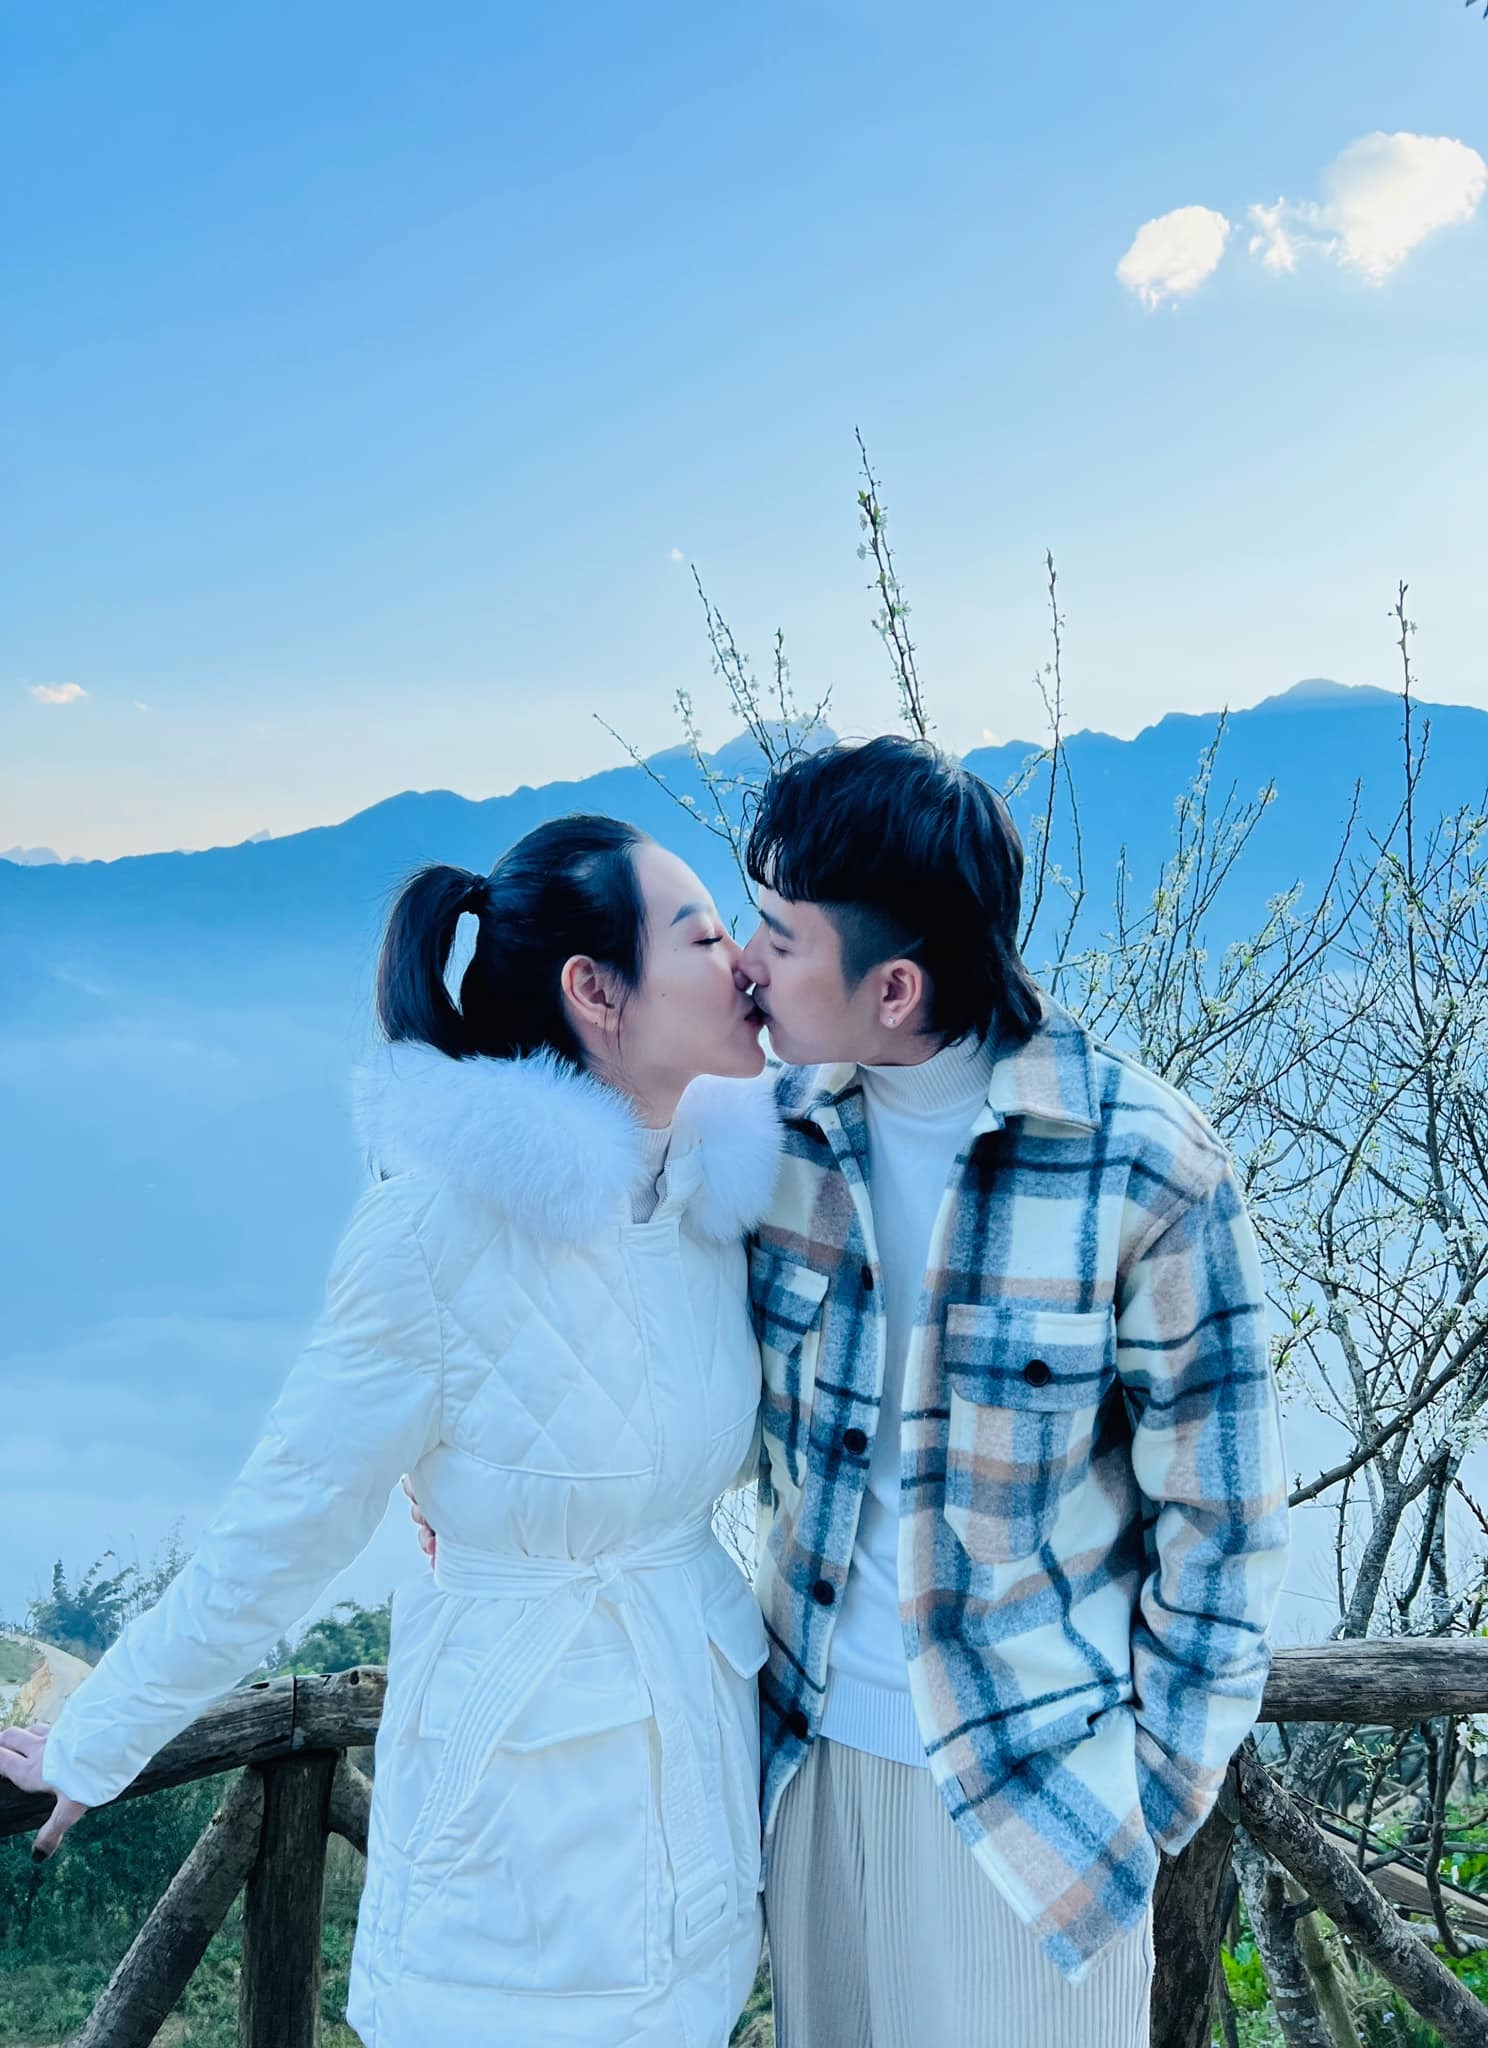 Manh Quan 'The way to the flower land': My wife criticized me for playing a hot scene that 'didn't come'